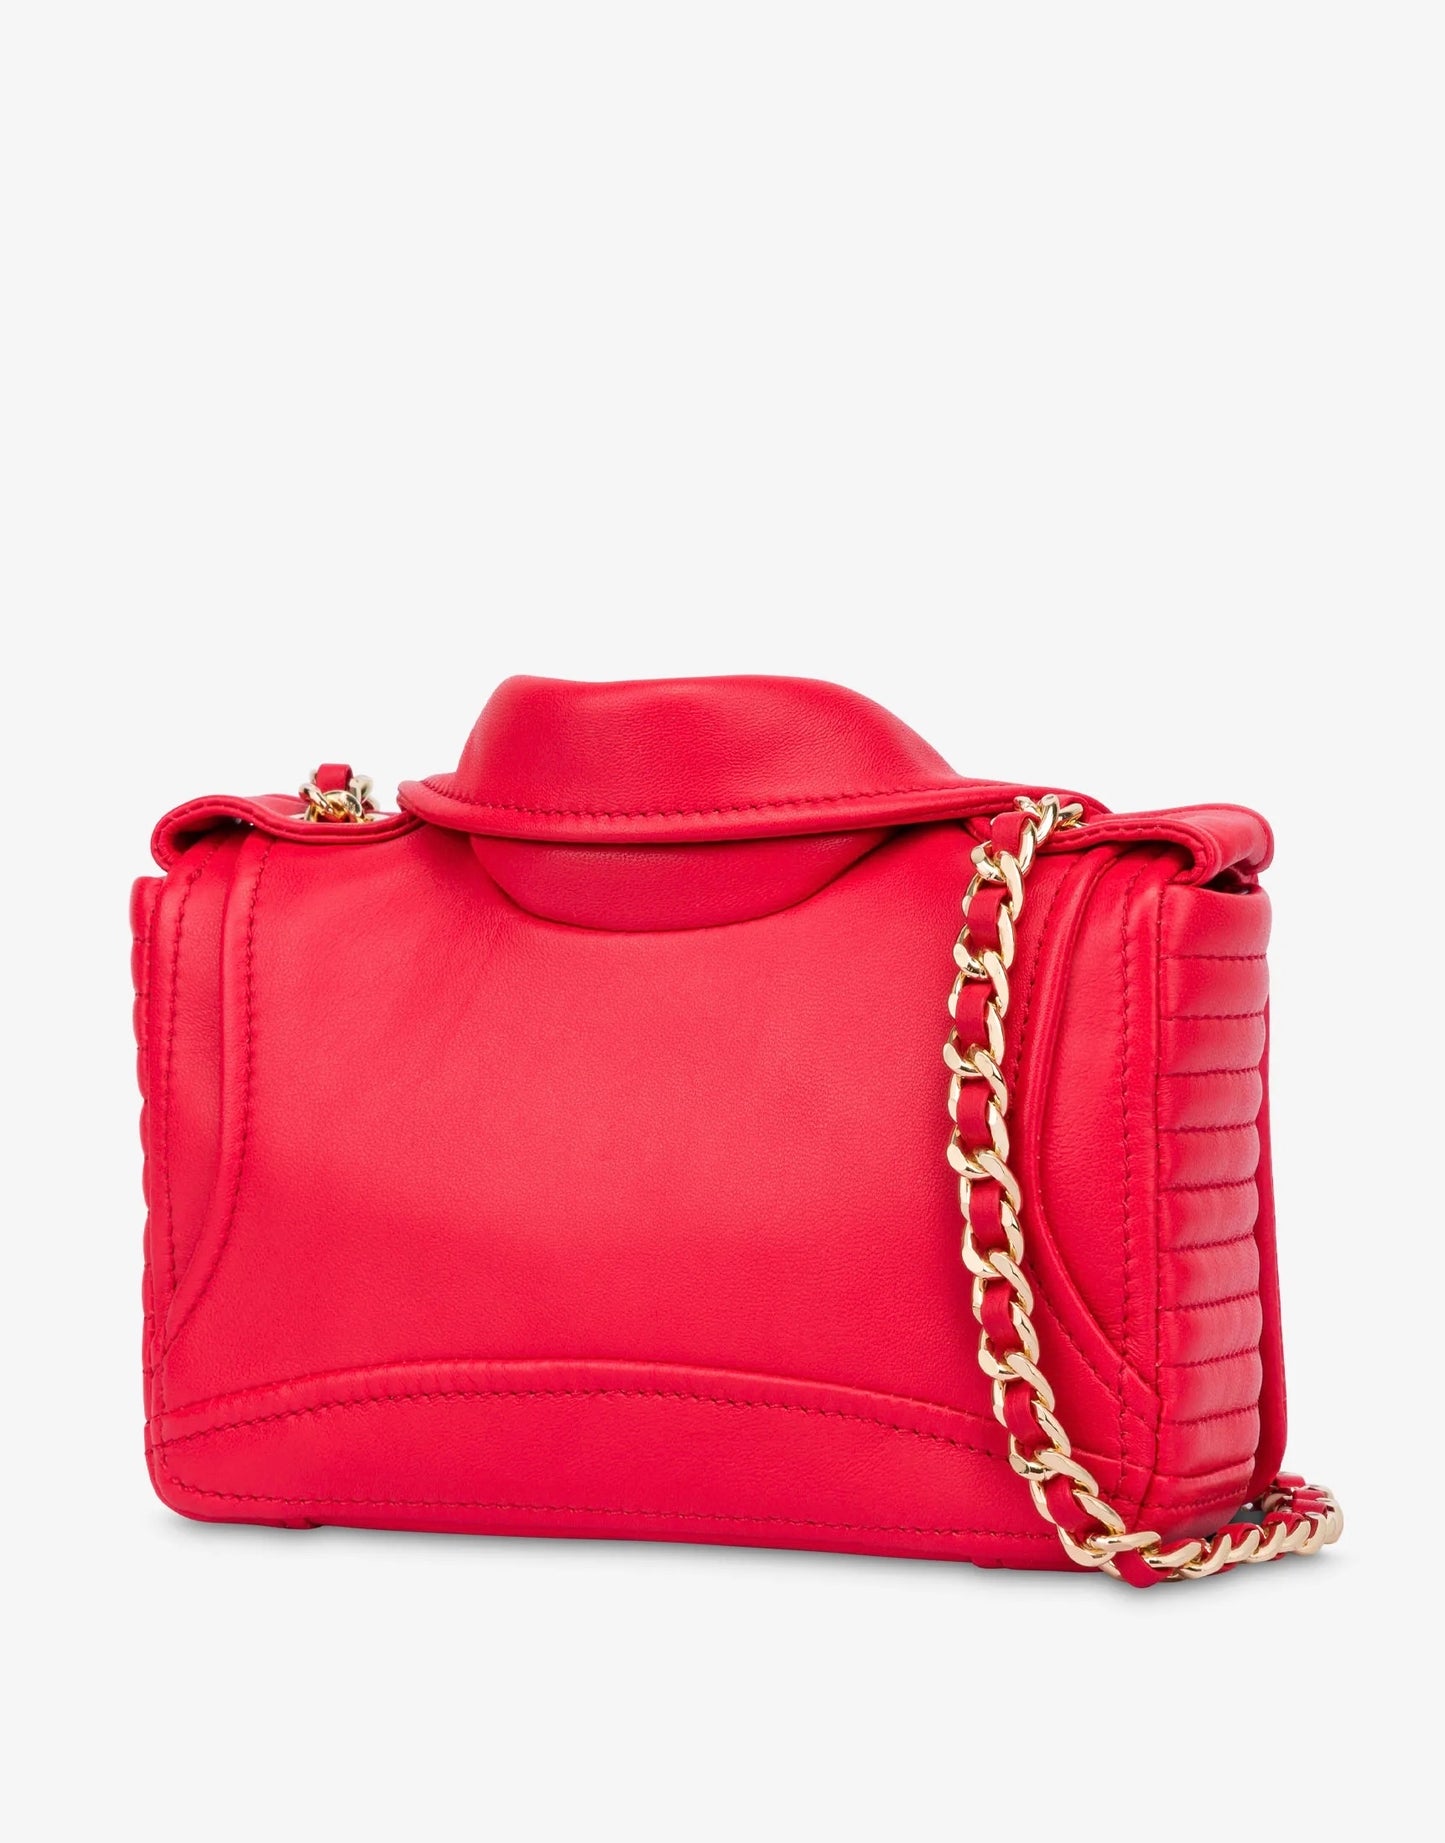 Moschino Zippered Leather Jacket Biker Shoulder Bag, Red, Retail $1795